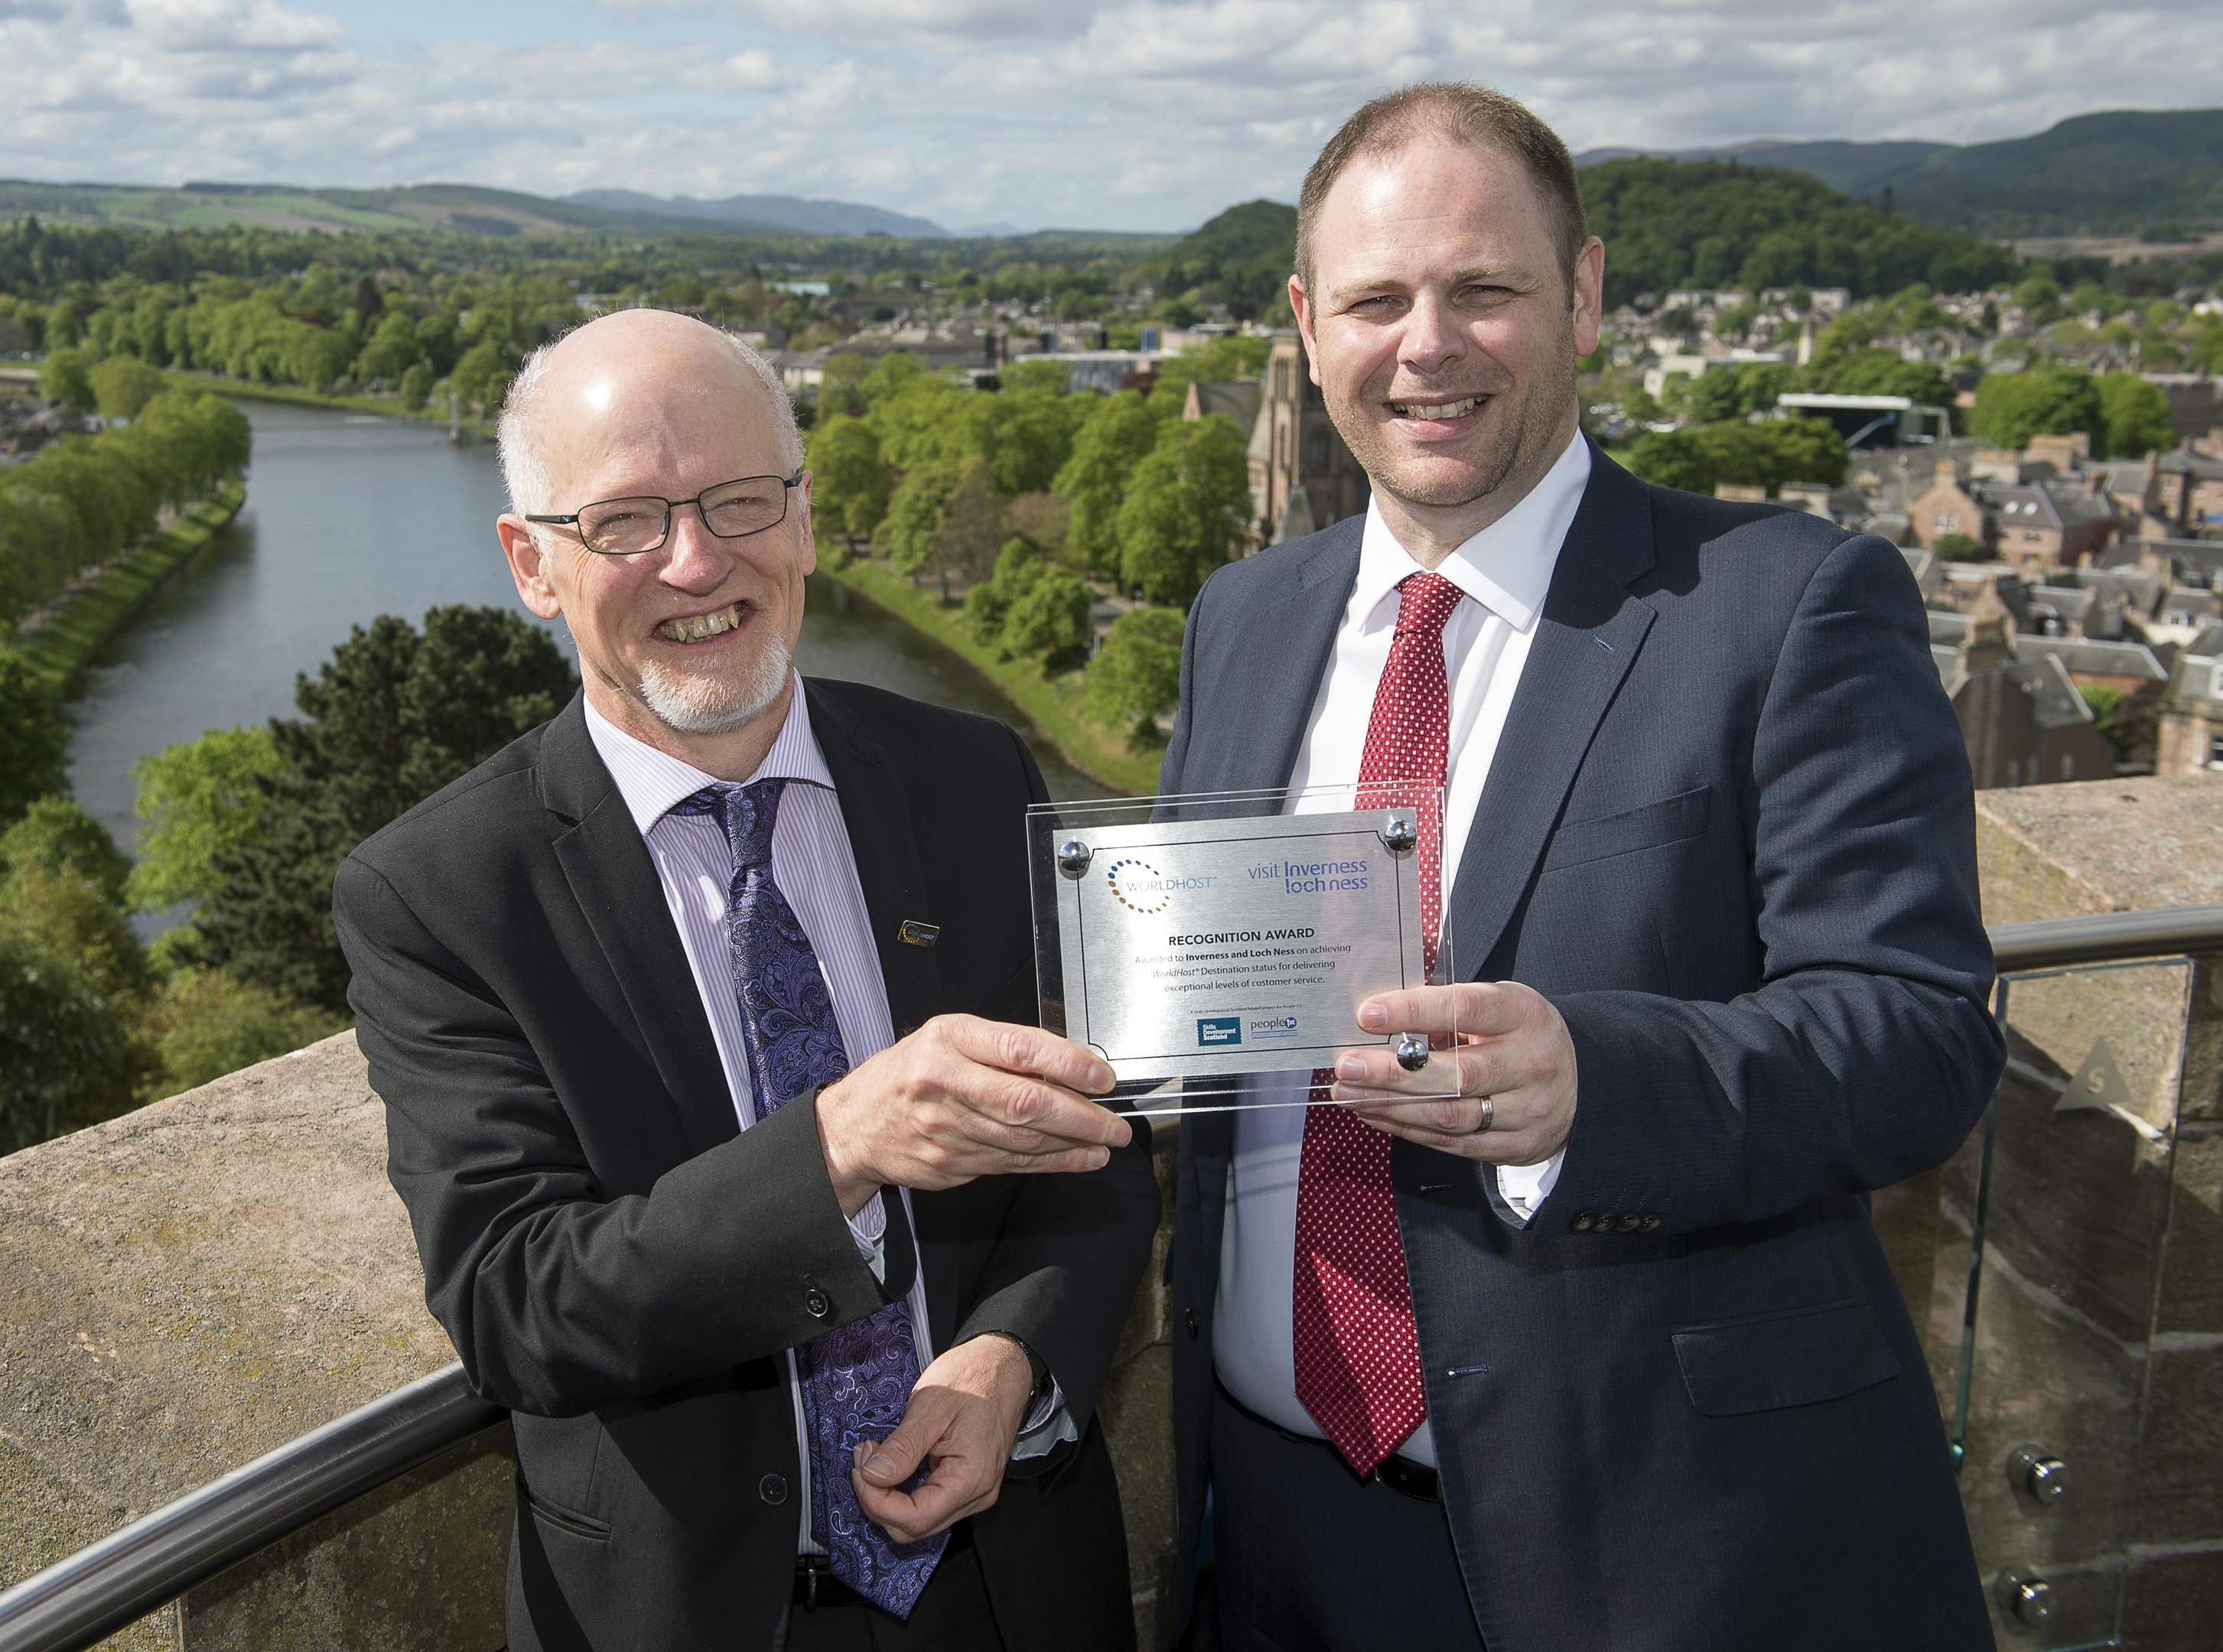 L-R Graeme Ambrose, chief executive of VisitInvernessLochNess receives award from David Allen, director of Scotland for People 


see press release 
contact Julie Edgar, PR, 0789 987 5151 or julie@jecommunications.co.uk